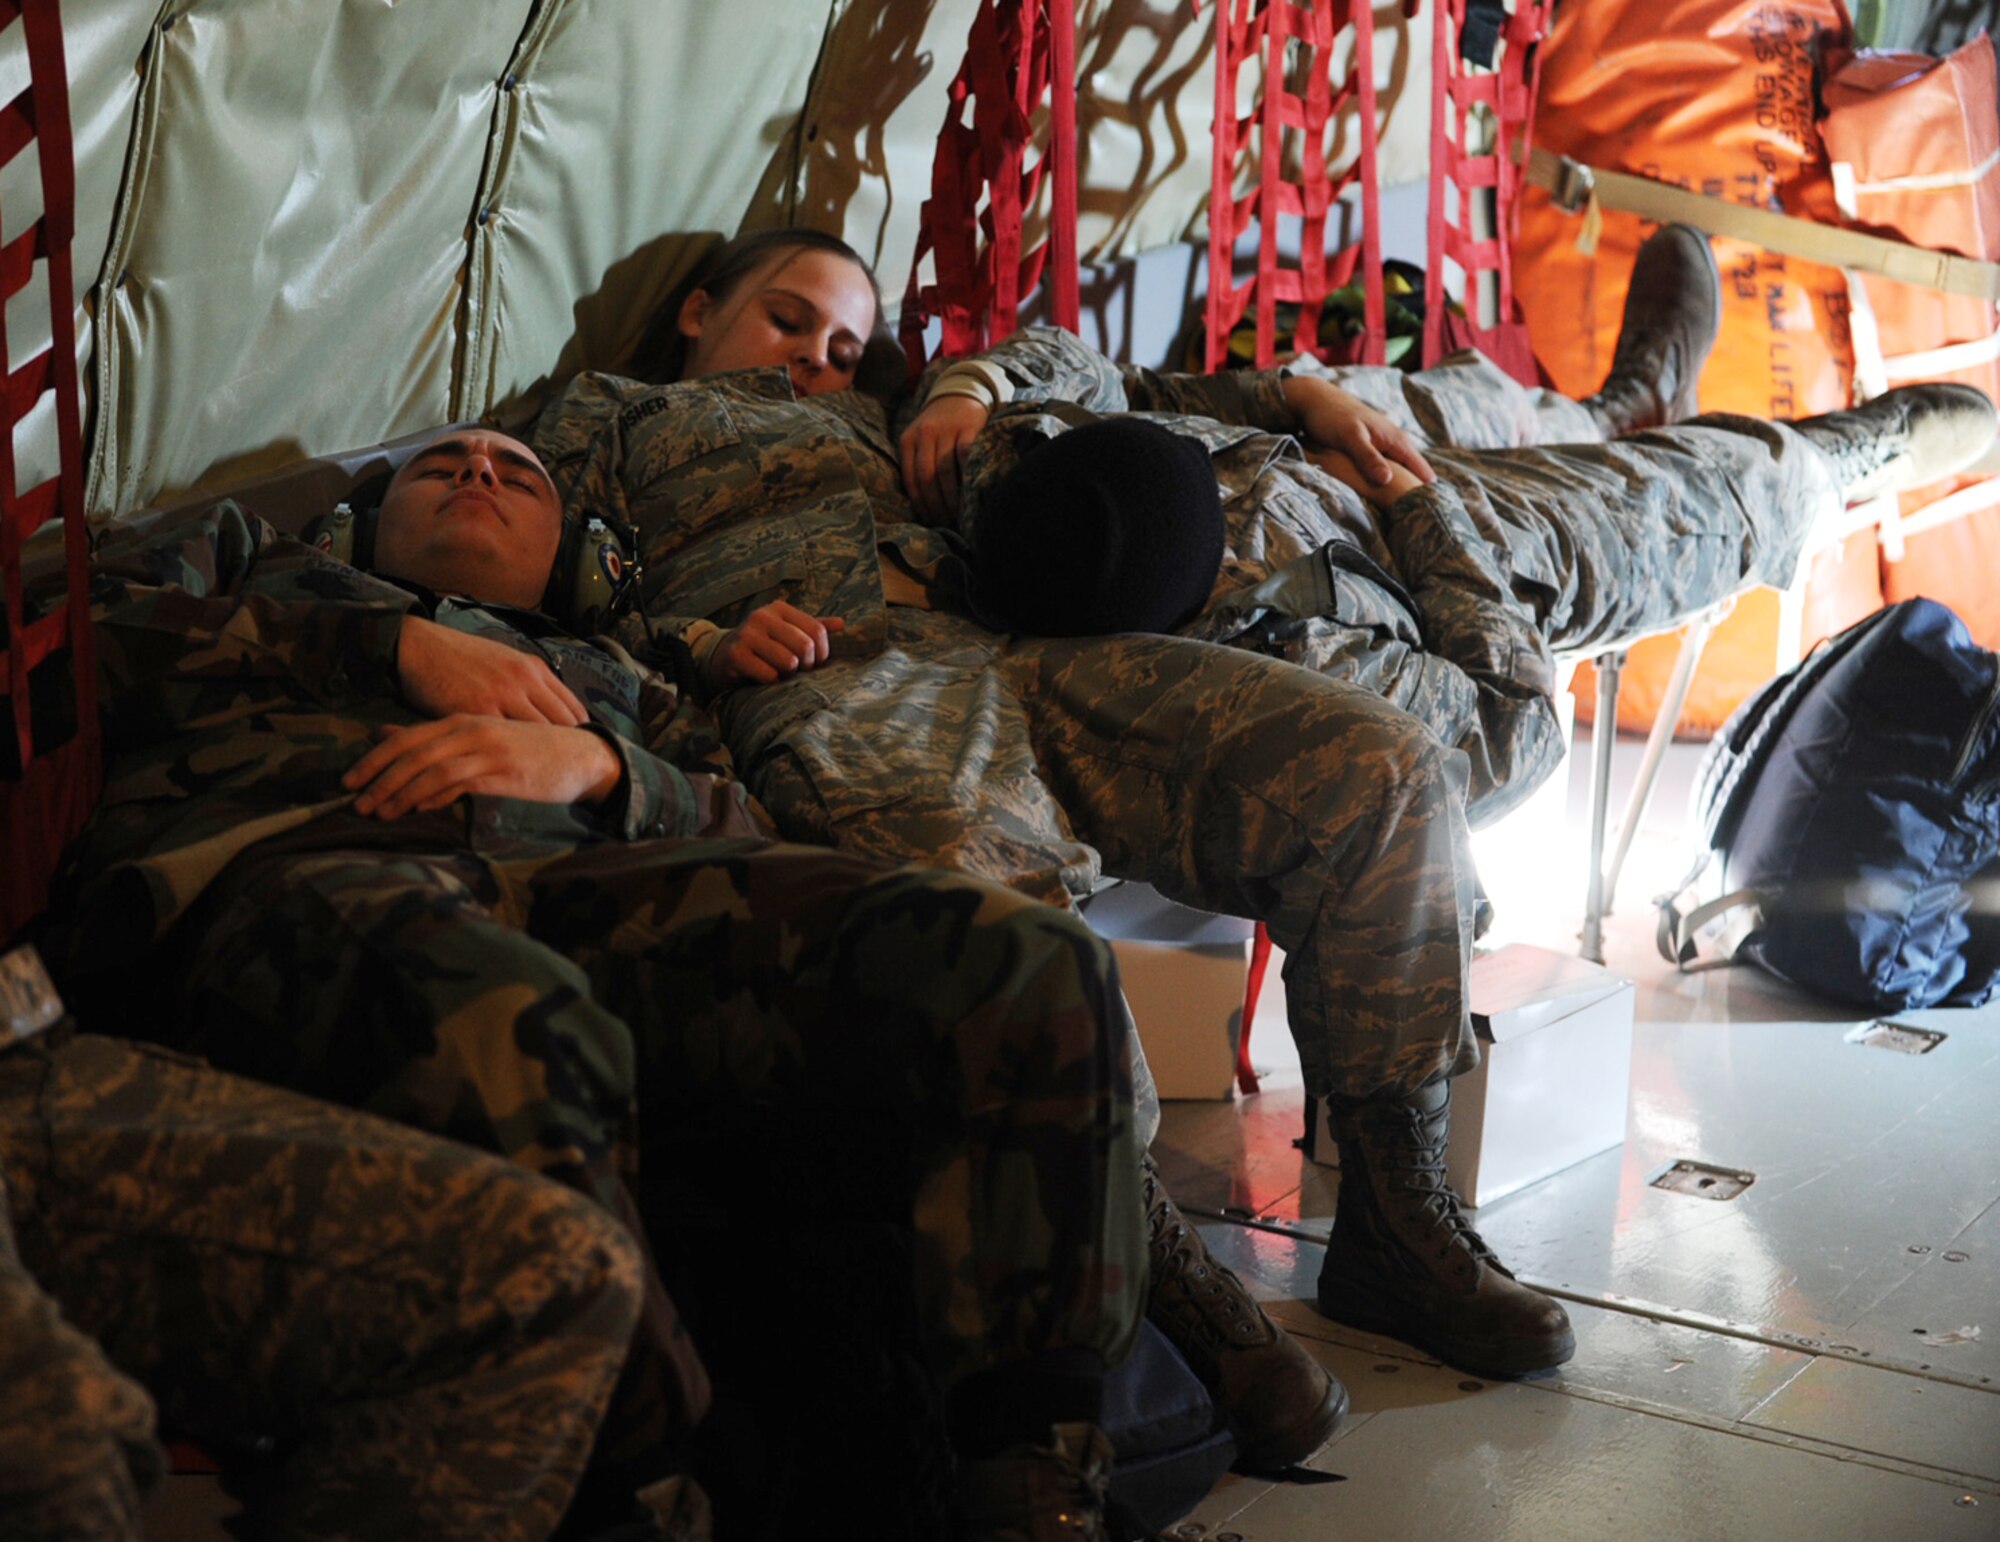 Three young Airmen assigned to the 22nd Aircraft Maintenance Group catch up on sleep during the flight back to McConnell Air Force Base, Kan. They and their fellow active-duty passengers climbed out of bed on a Saturday morning to be at McConnell by 6 a.m. for preflight briefs. The Airmen are, from left to right, Airman 1st Class Brad Evens, Airman Nikki Fisher and Airman 1st Class Luis Vasquez. (U.S. Air  Force photo/Tech. Sgt. Jason Schaap)